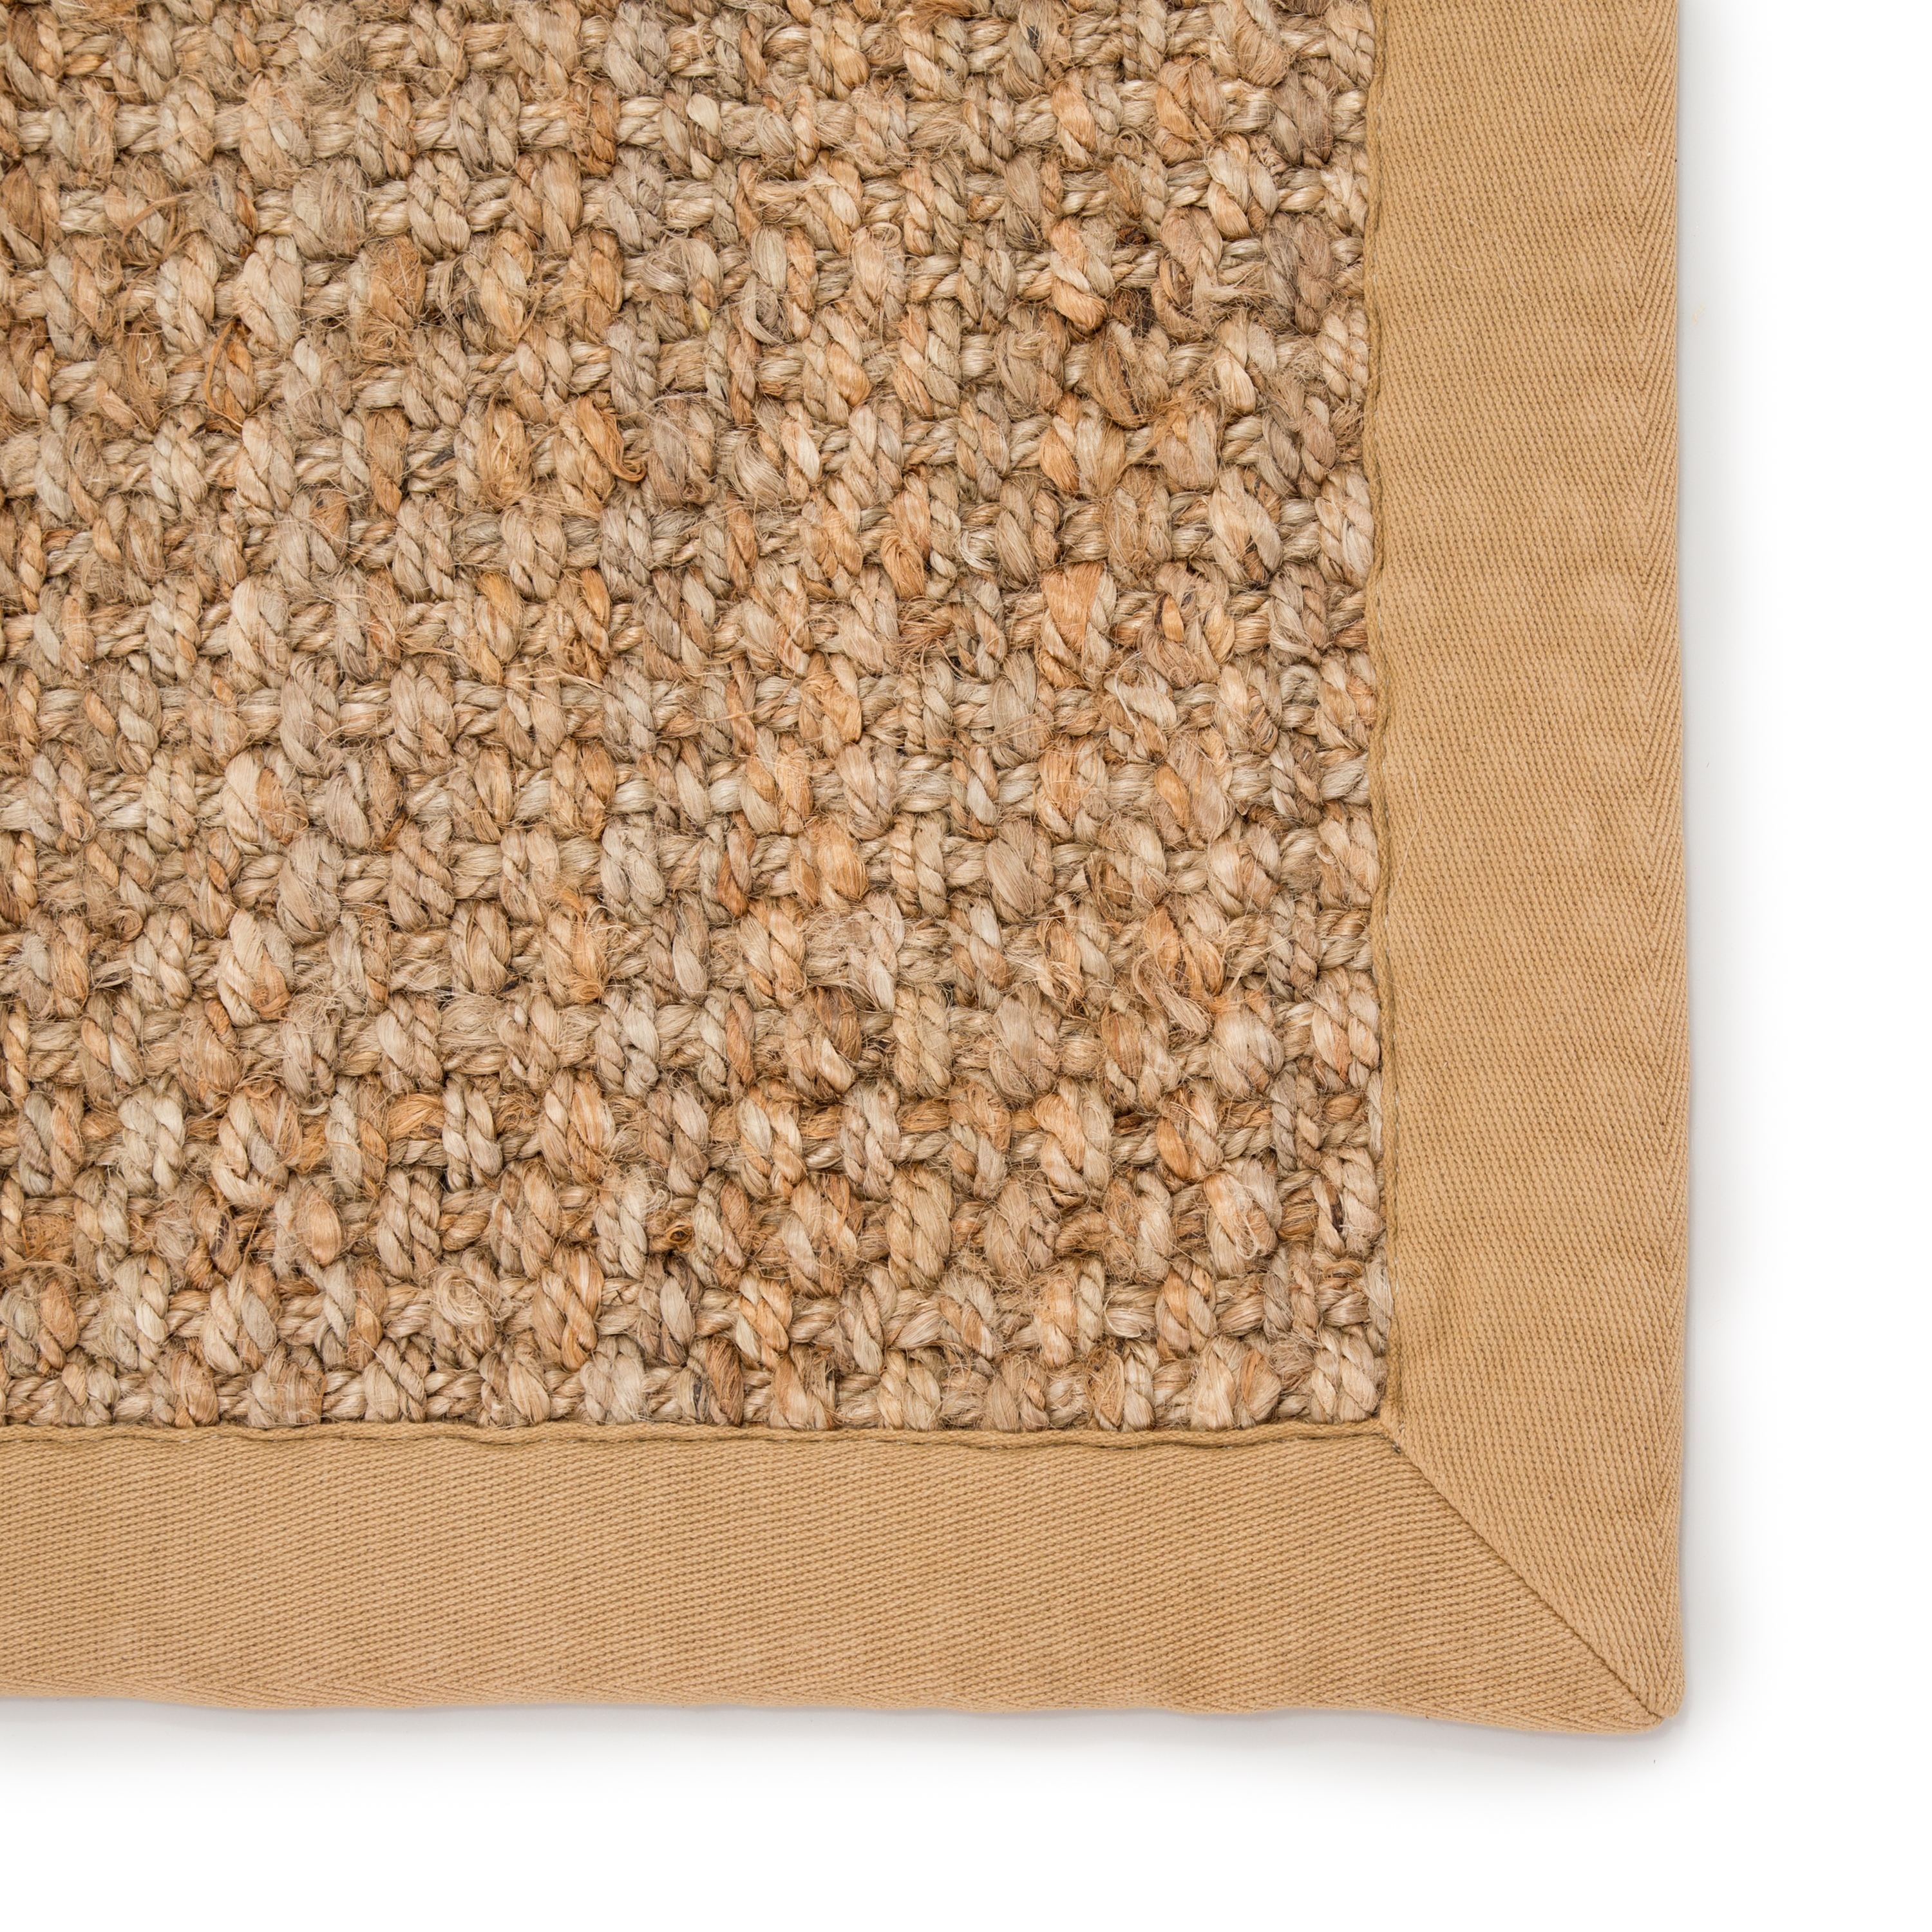 Adesina Natural Solid Beige Area Rug (9' X 12') - Image 3